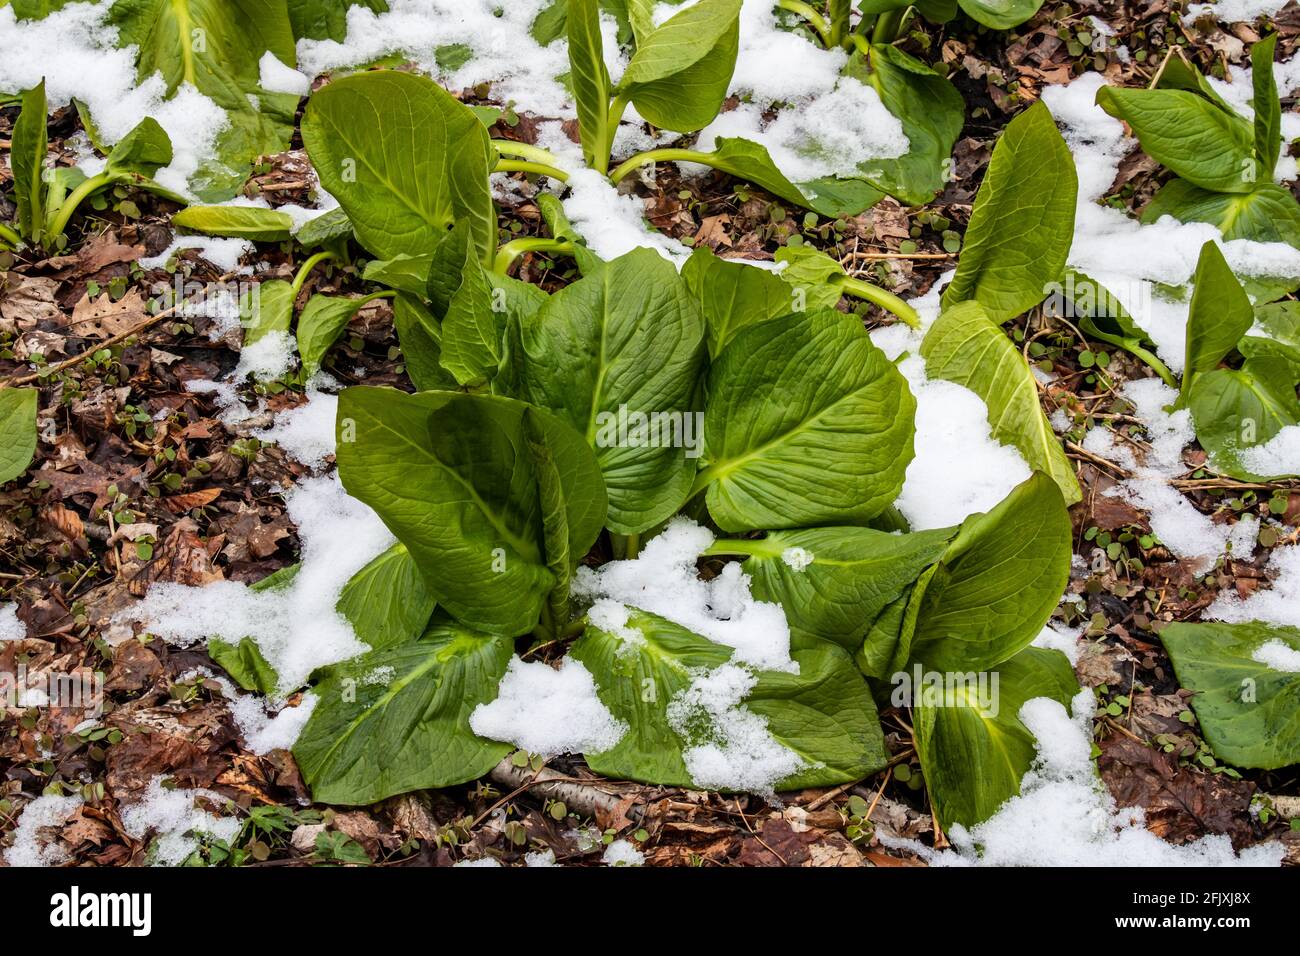 Skunk cabbage wilting in the snow on the forest floor Stock Photo